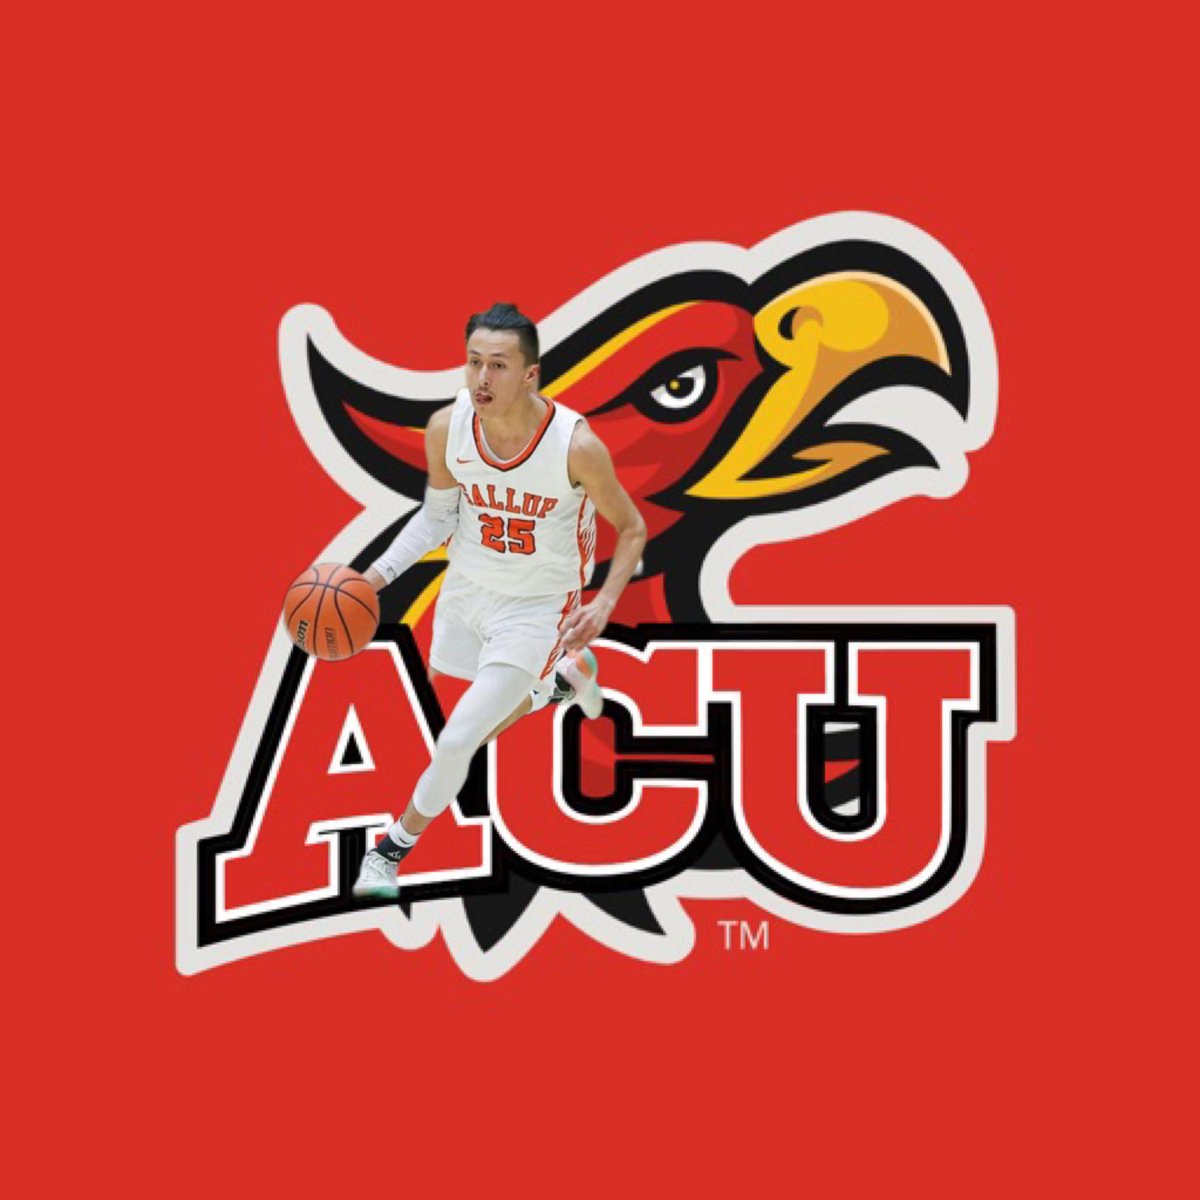 I am excited to announce that I have received an official offer from ACU! Blessed and praying for God's direction! Thank you for having me out this week. @CoachPeters_ Hebrews 12:11 #YouOnlyLoseIfYouQuit #BigDreamsBIGGERGod pic.twitter.com/DXC7hvvVqT